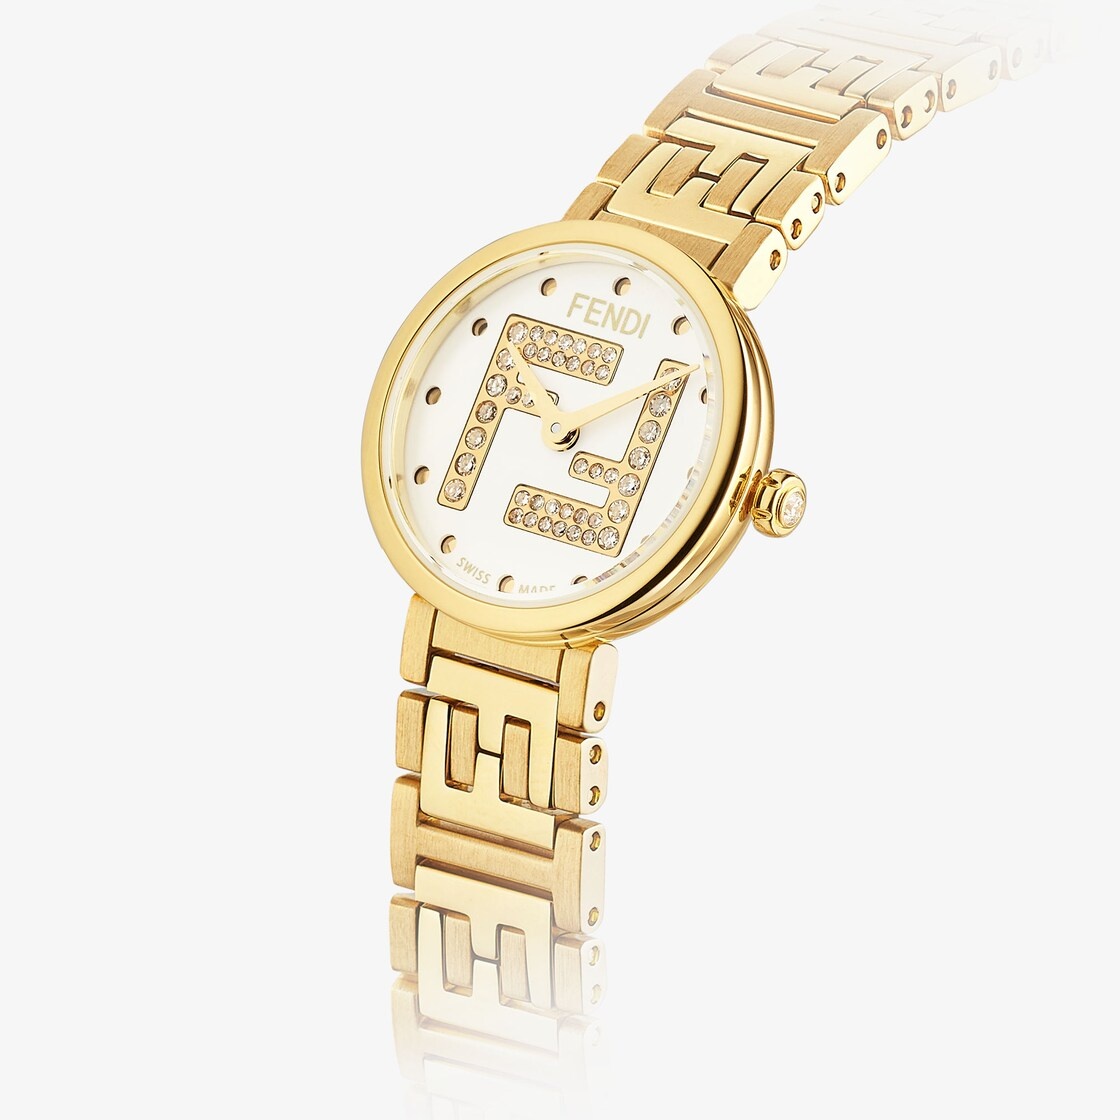 19 mm round case and bezel in shiny stainless steel and brushed gold-colored bezel. Crown with 1 ins - 2